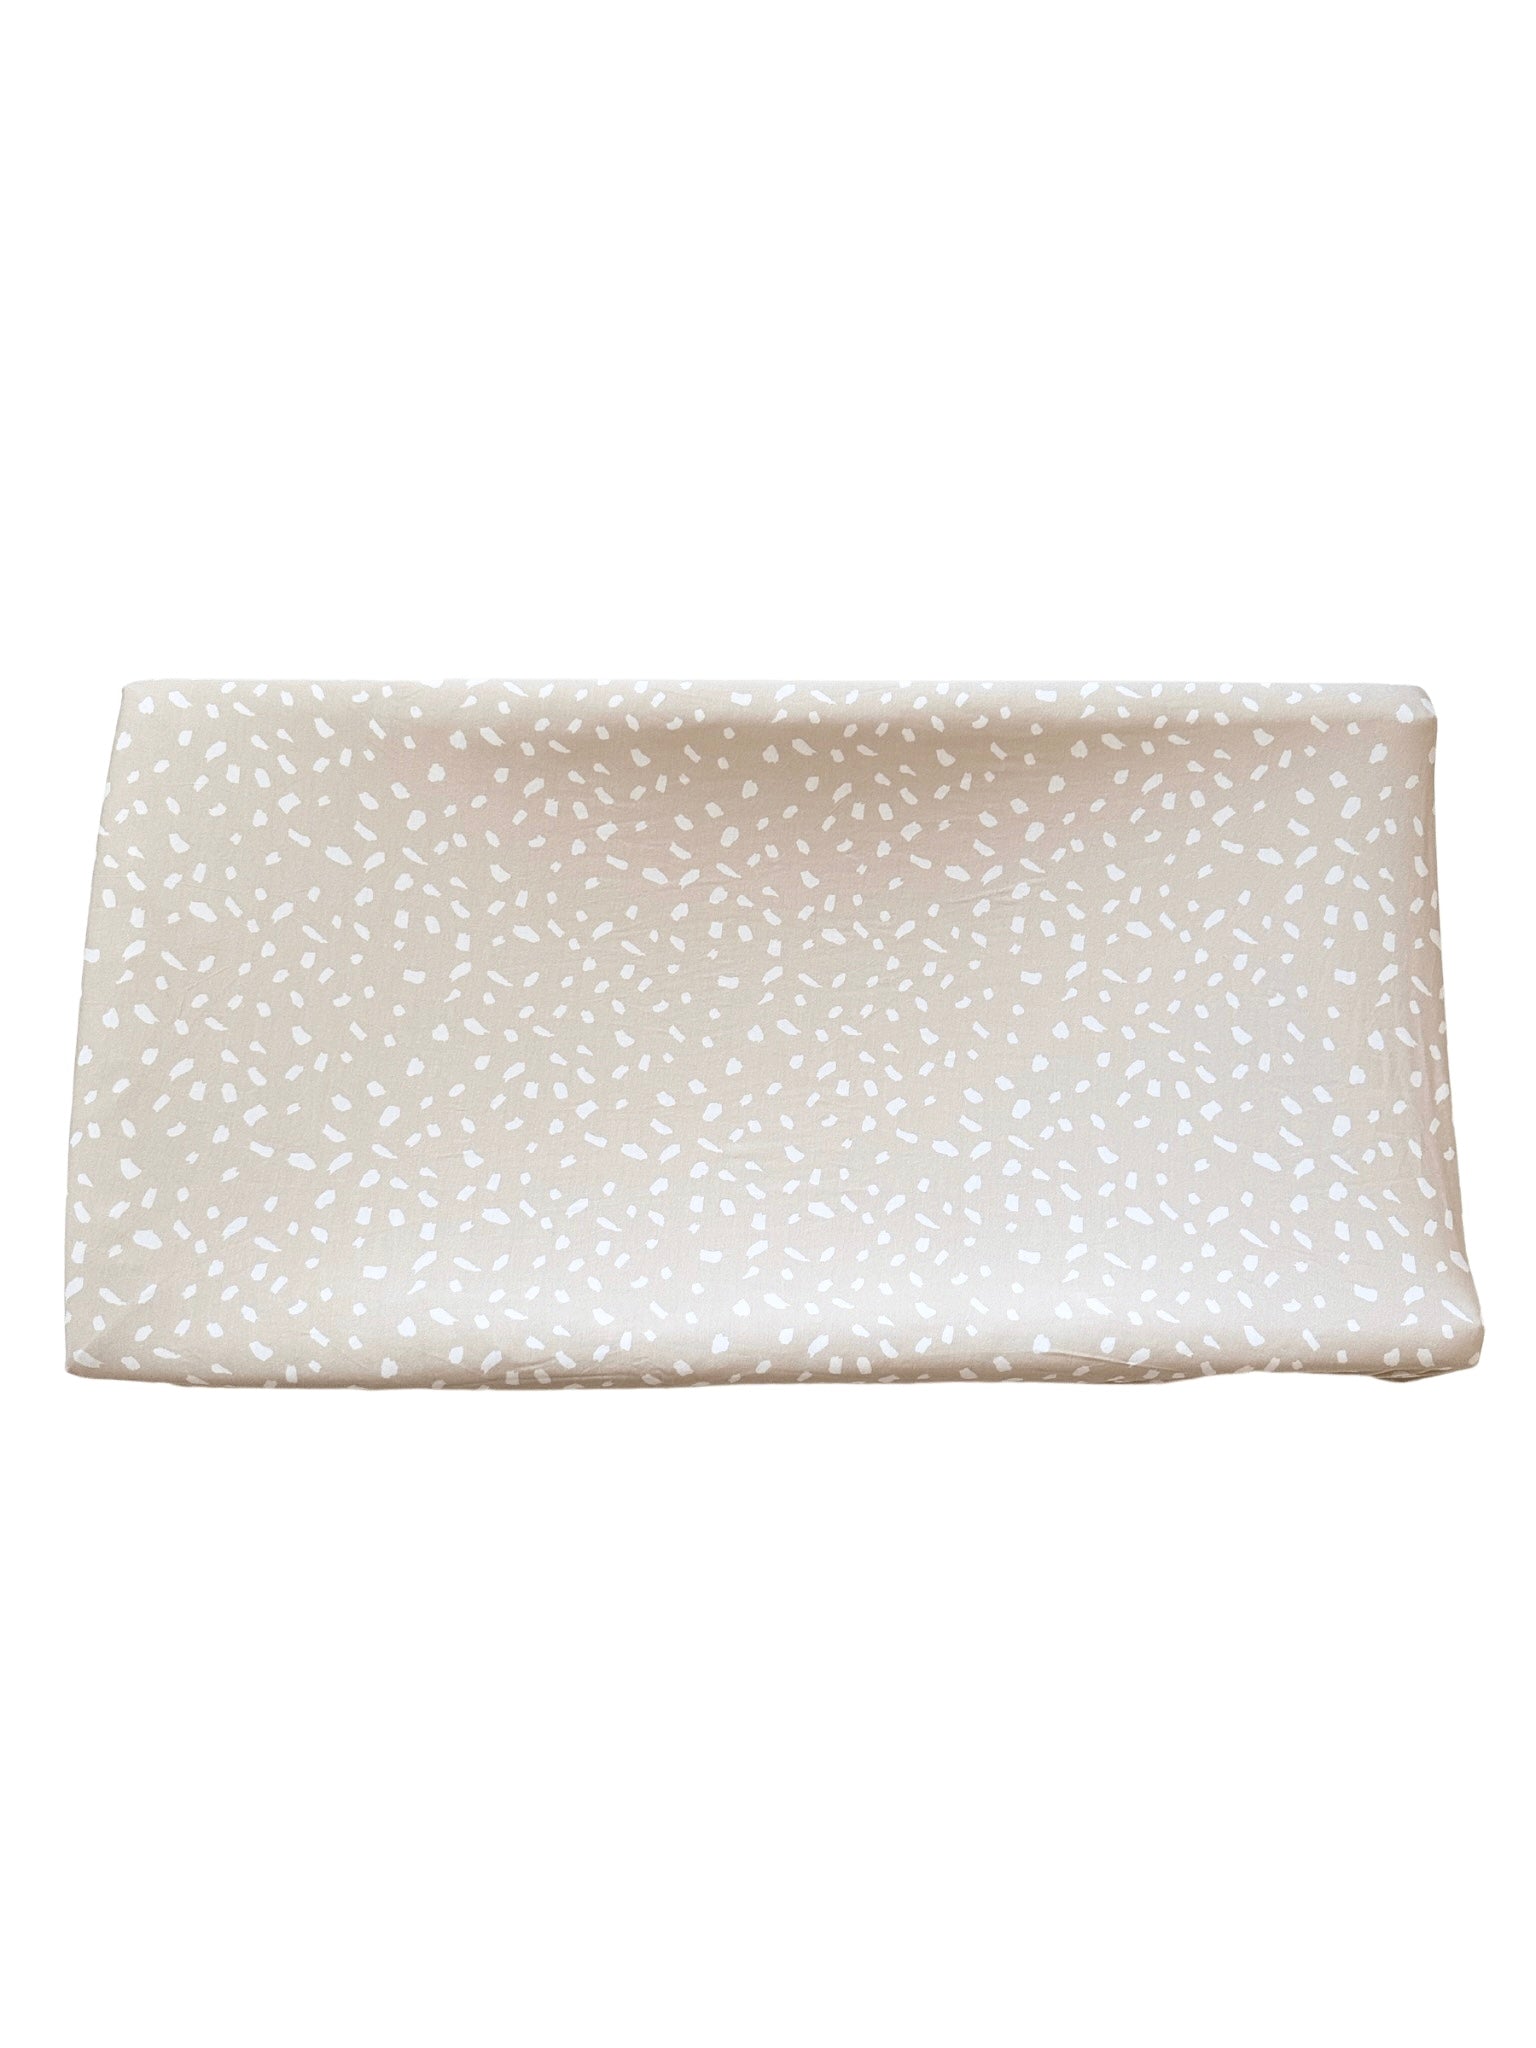 Bamboo Premium Changing Pad Cover - Sand Spotted - Harp Angel Boutique